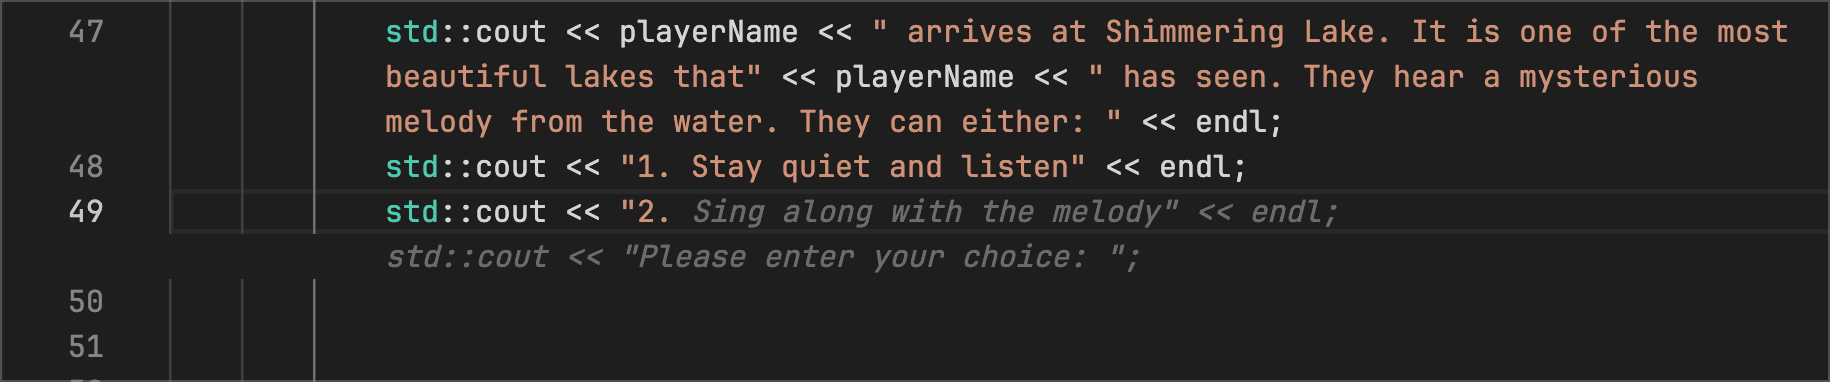 adventure.cpp - I added an endline to prompt Code Suggestions to break the choices into end line outputs